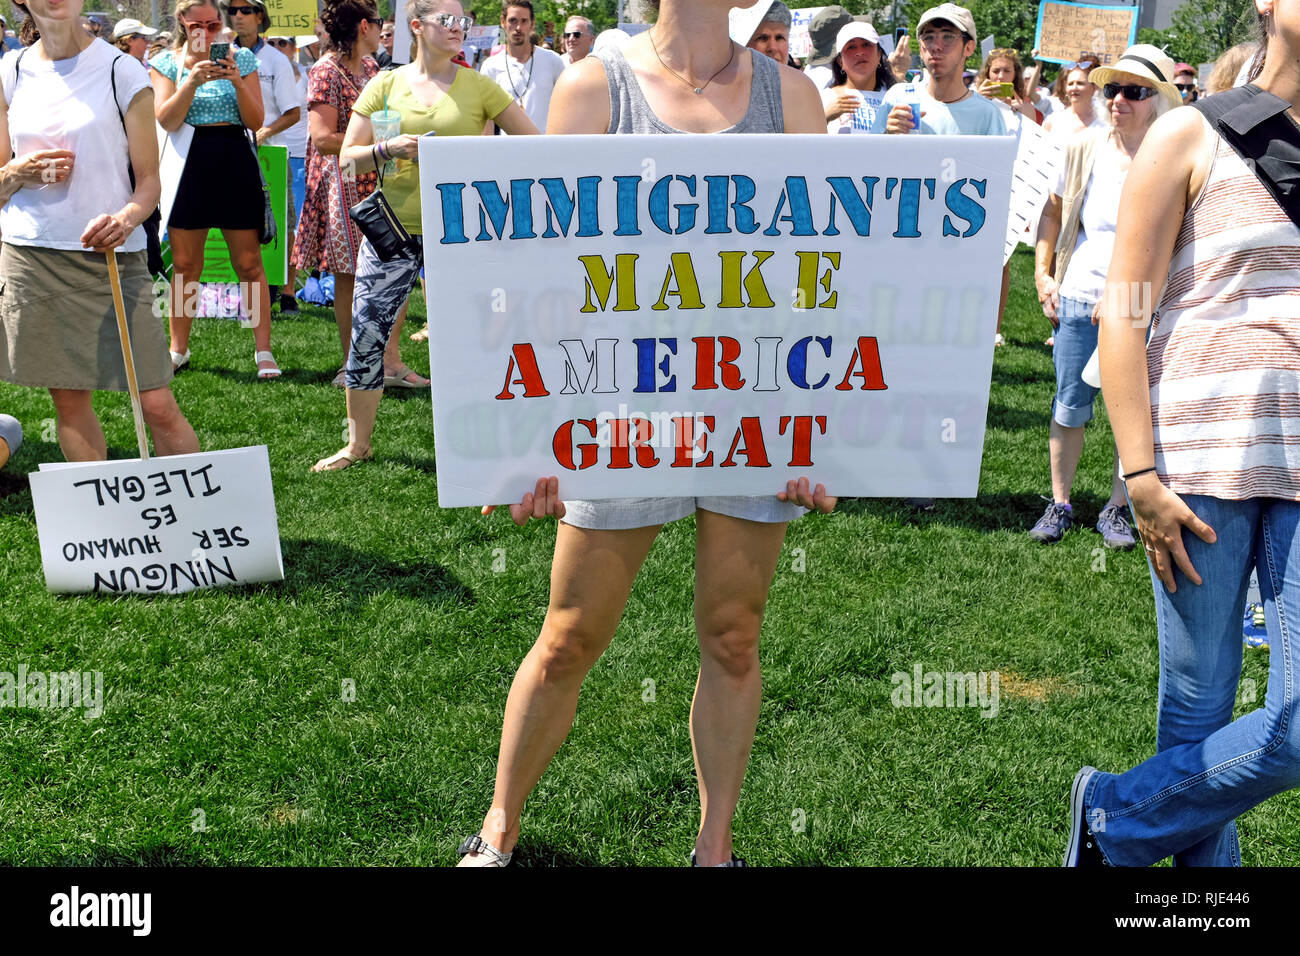 A woman holds an Immigrants Make America Great sign at a rally against Trump immigration policies in downtown Cleveland, Ohio, USA on June 30, 2018. Stock Photo